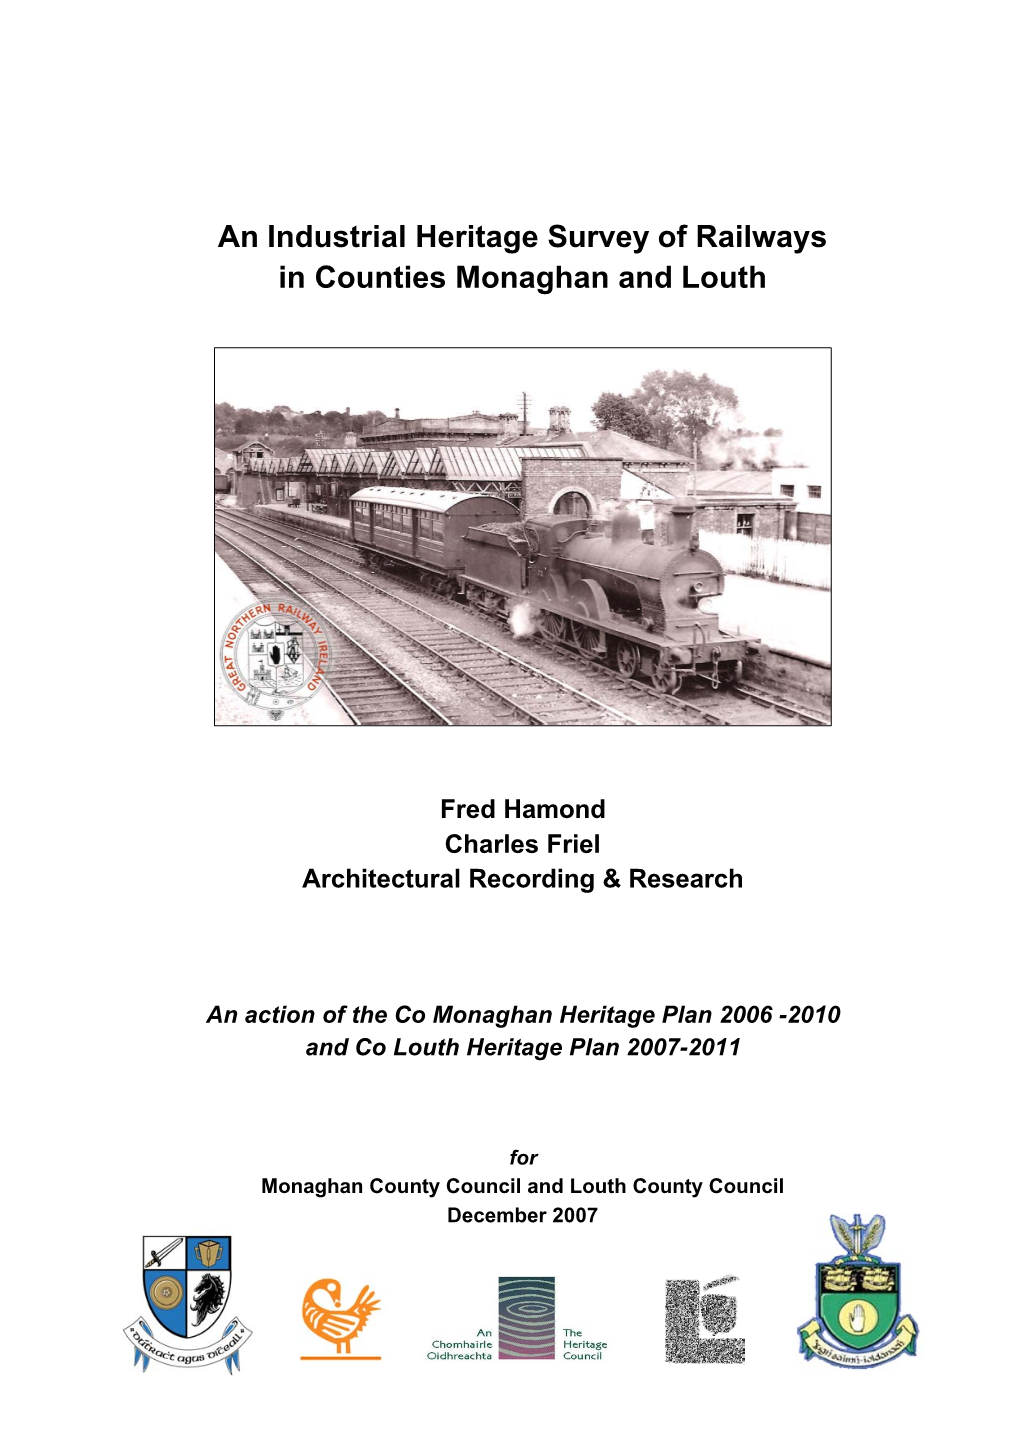 An Industrial Heritage Survey of Railways in Counties Monaghan and Louth